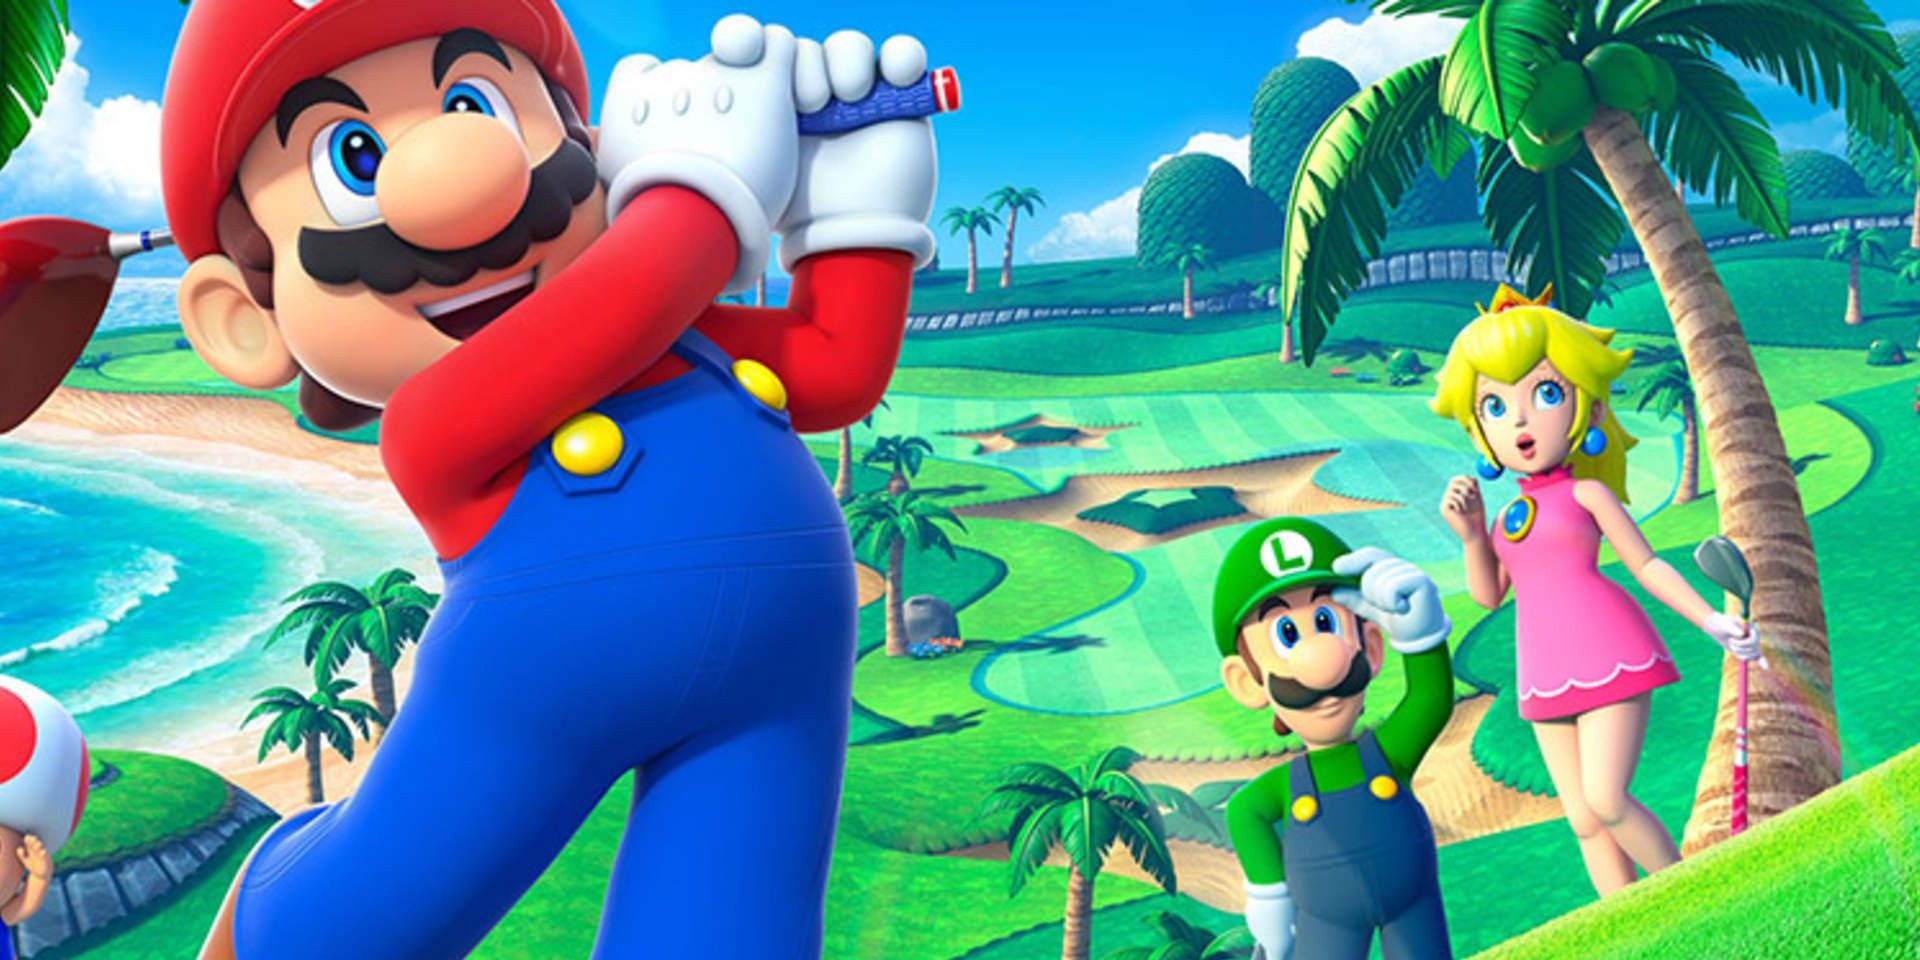 is mario golf coming to switch